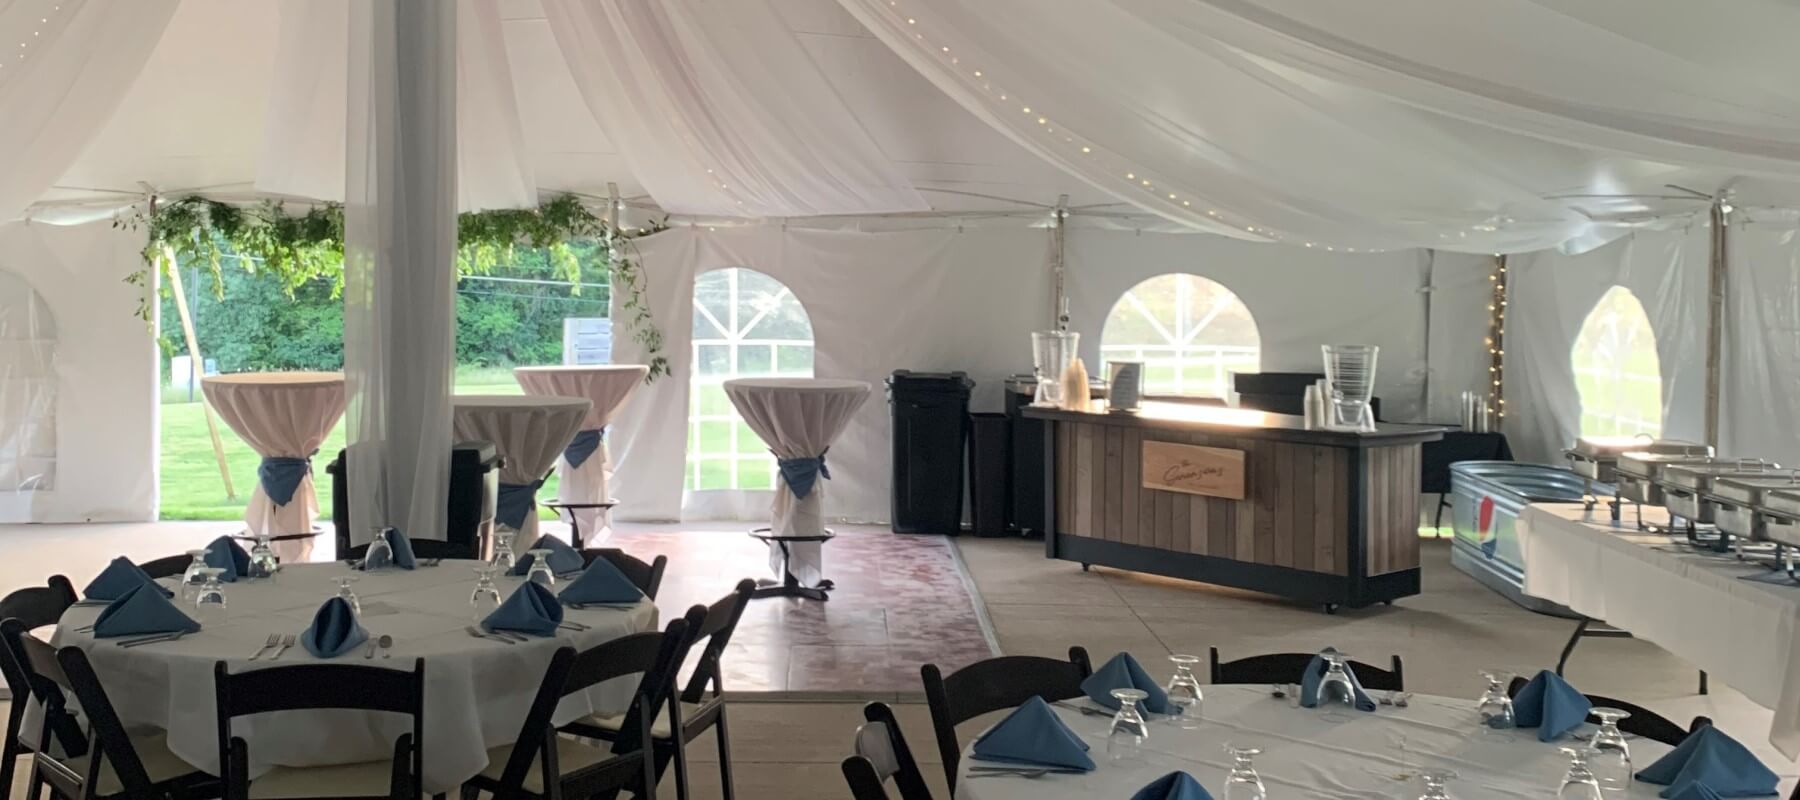 Bridal tent with tables set up for an event